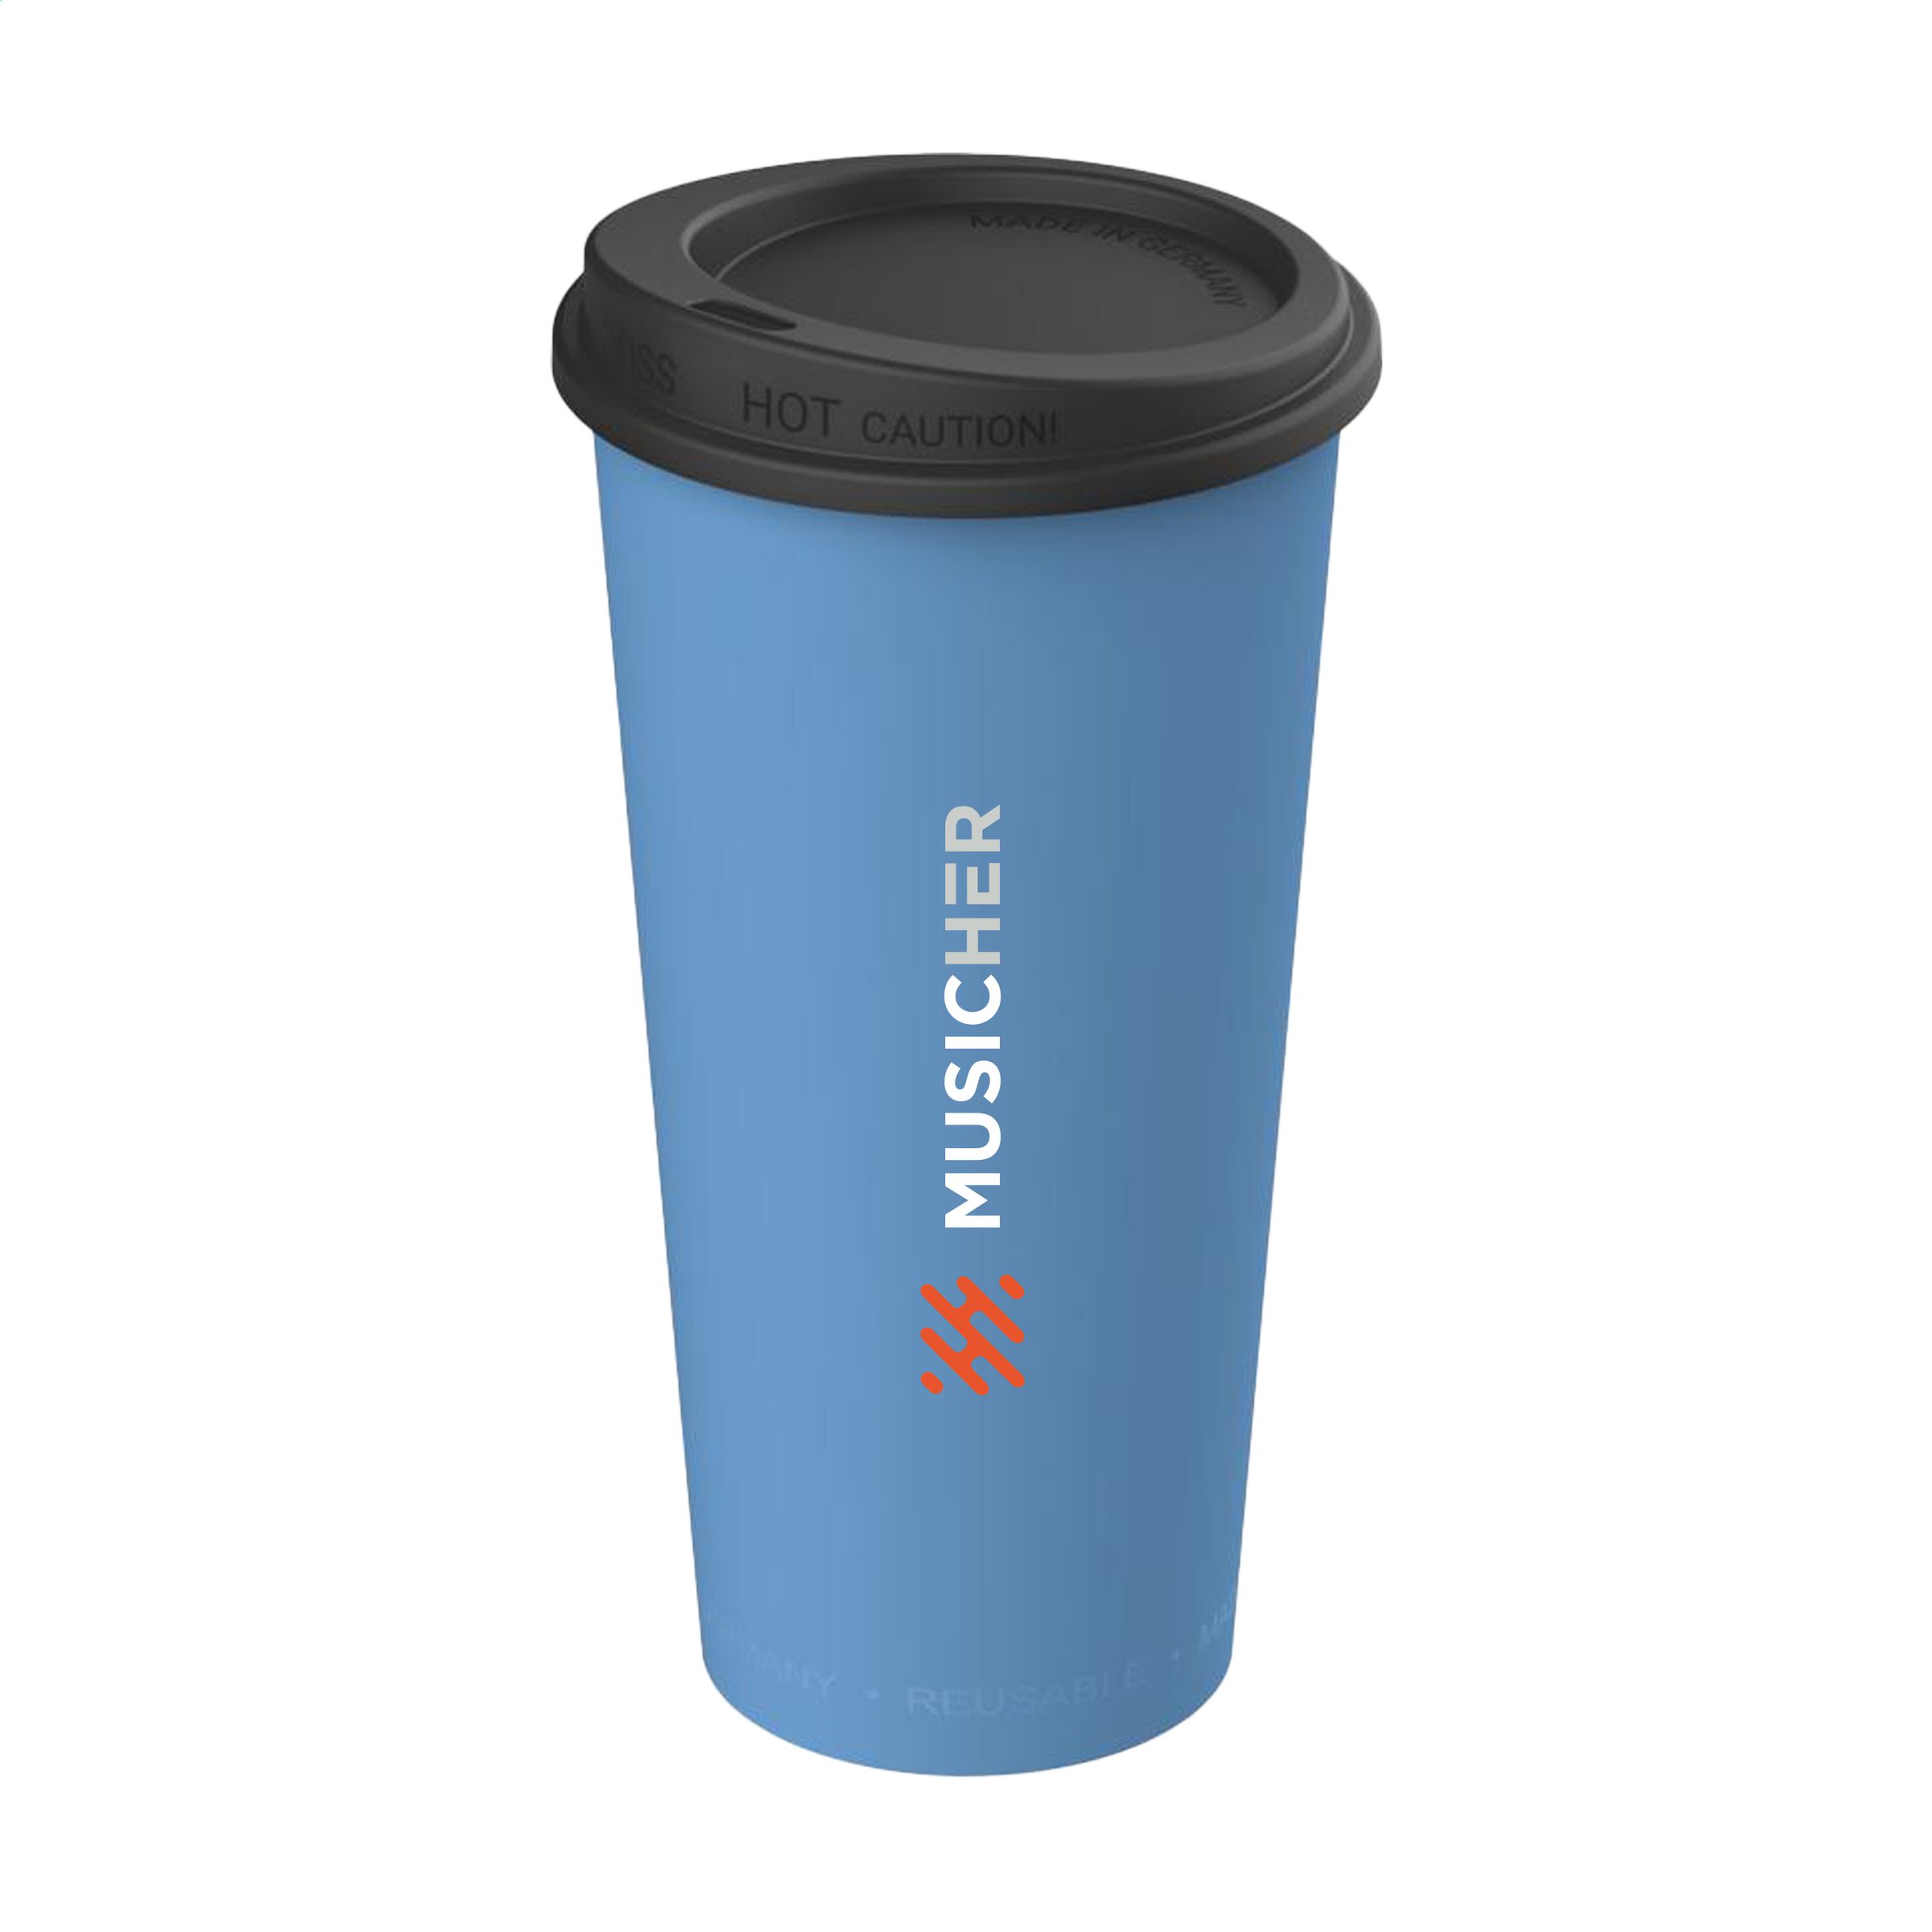 Reusable Plastic Coffee Cup with Lid - Coldred